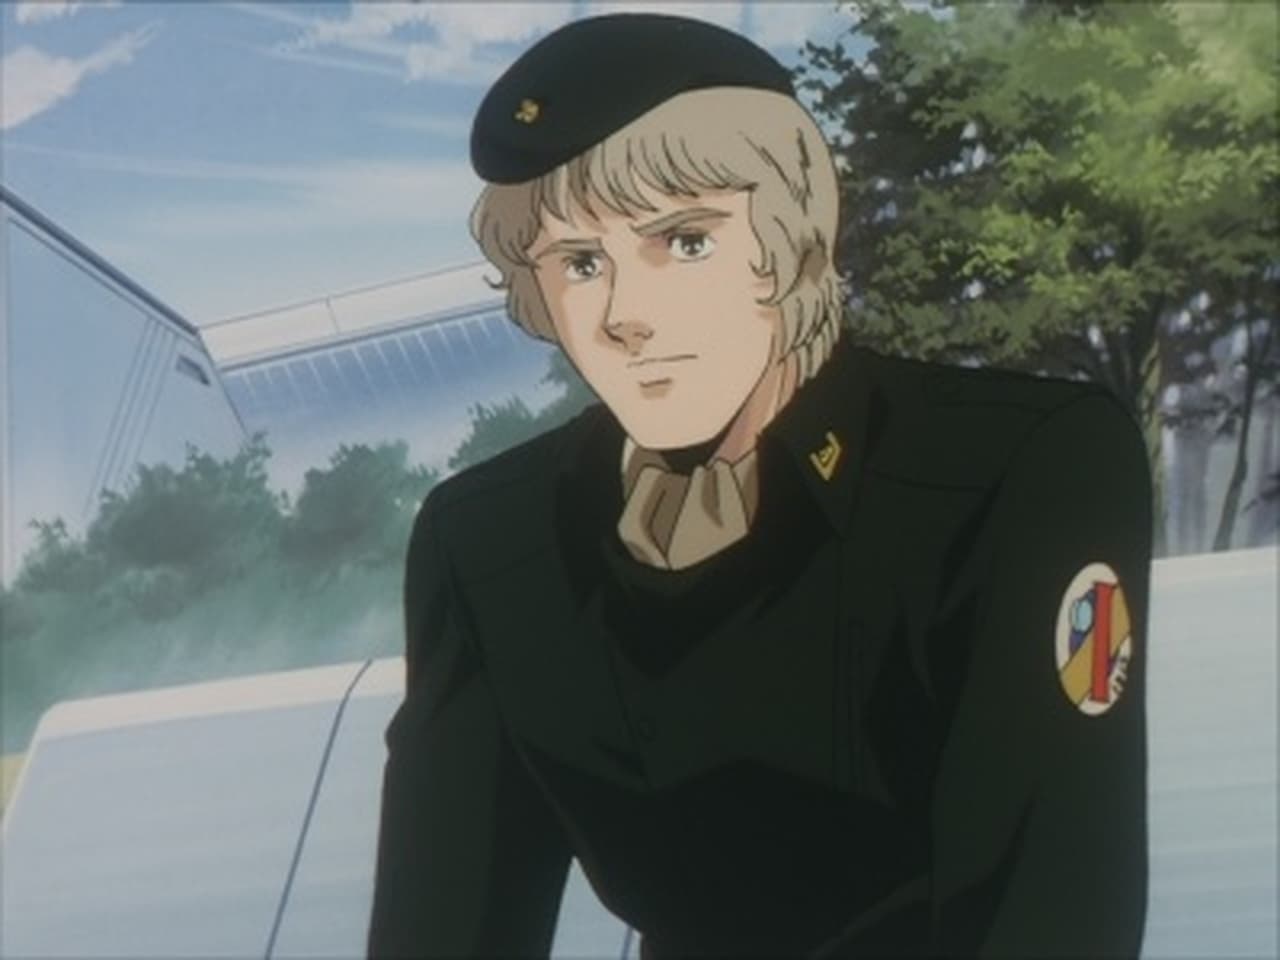 Legend of the Galactic Heroes - Season 4 Episode 15 : Invitation to Rebellion